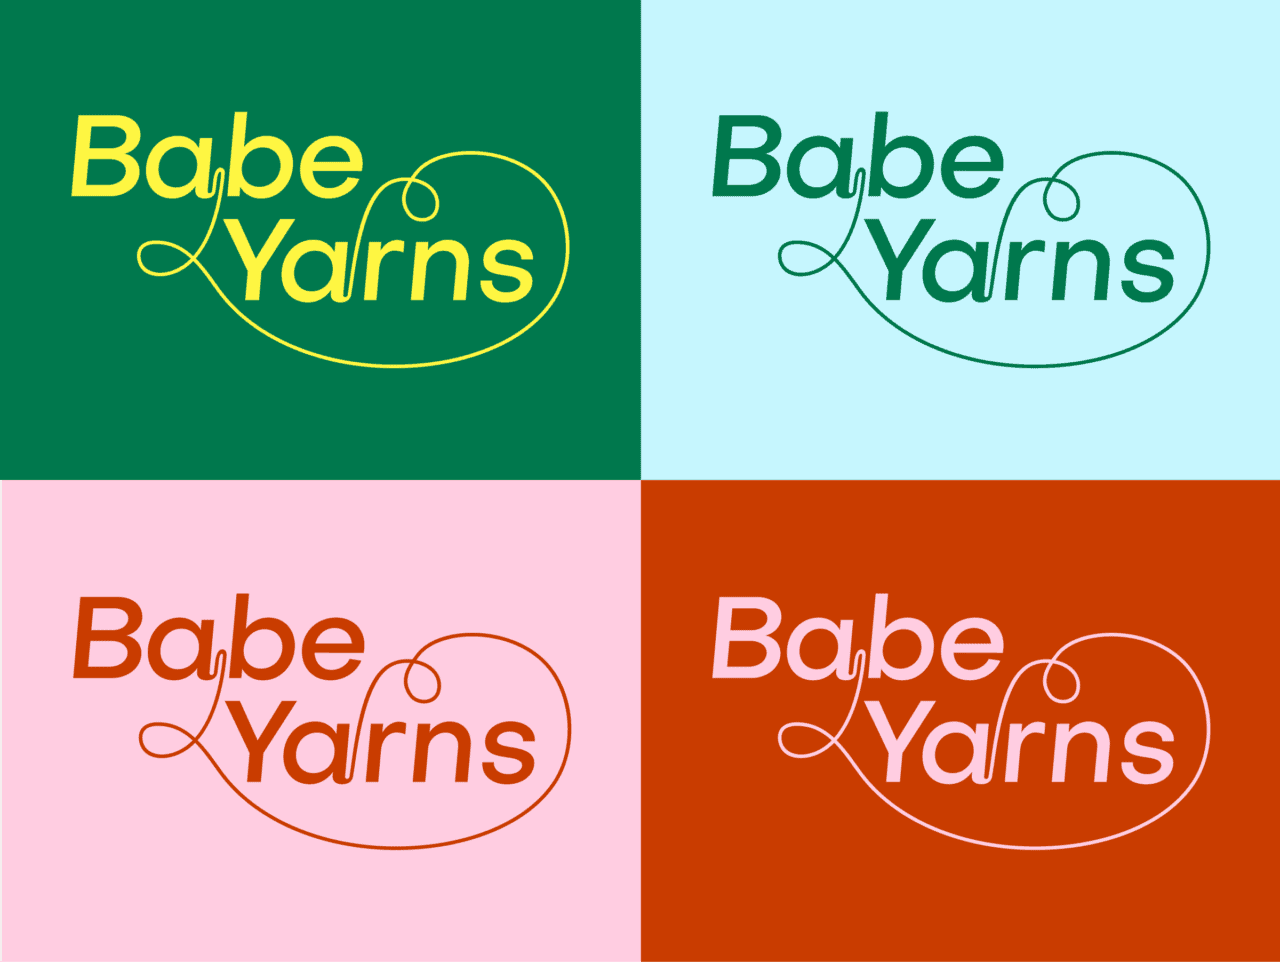 On four colourful backgrounds text reads 'Babe Yarns'. The 'a' in babe and the 'a' in 'yarns' are joined by a string of yarn that flows between the words